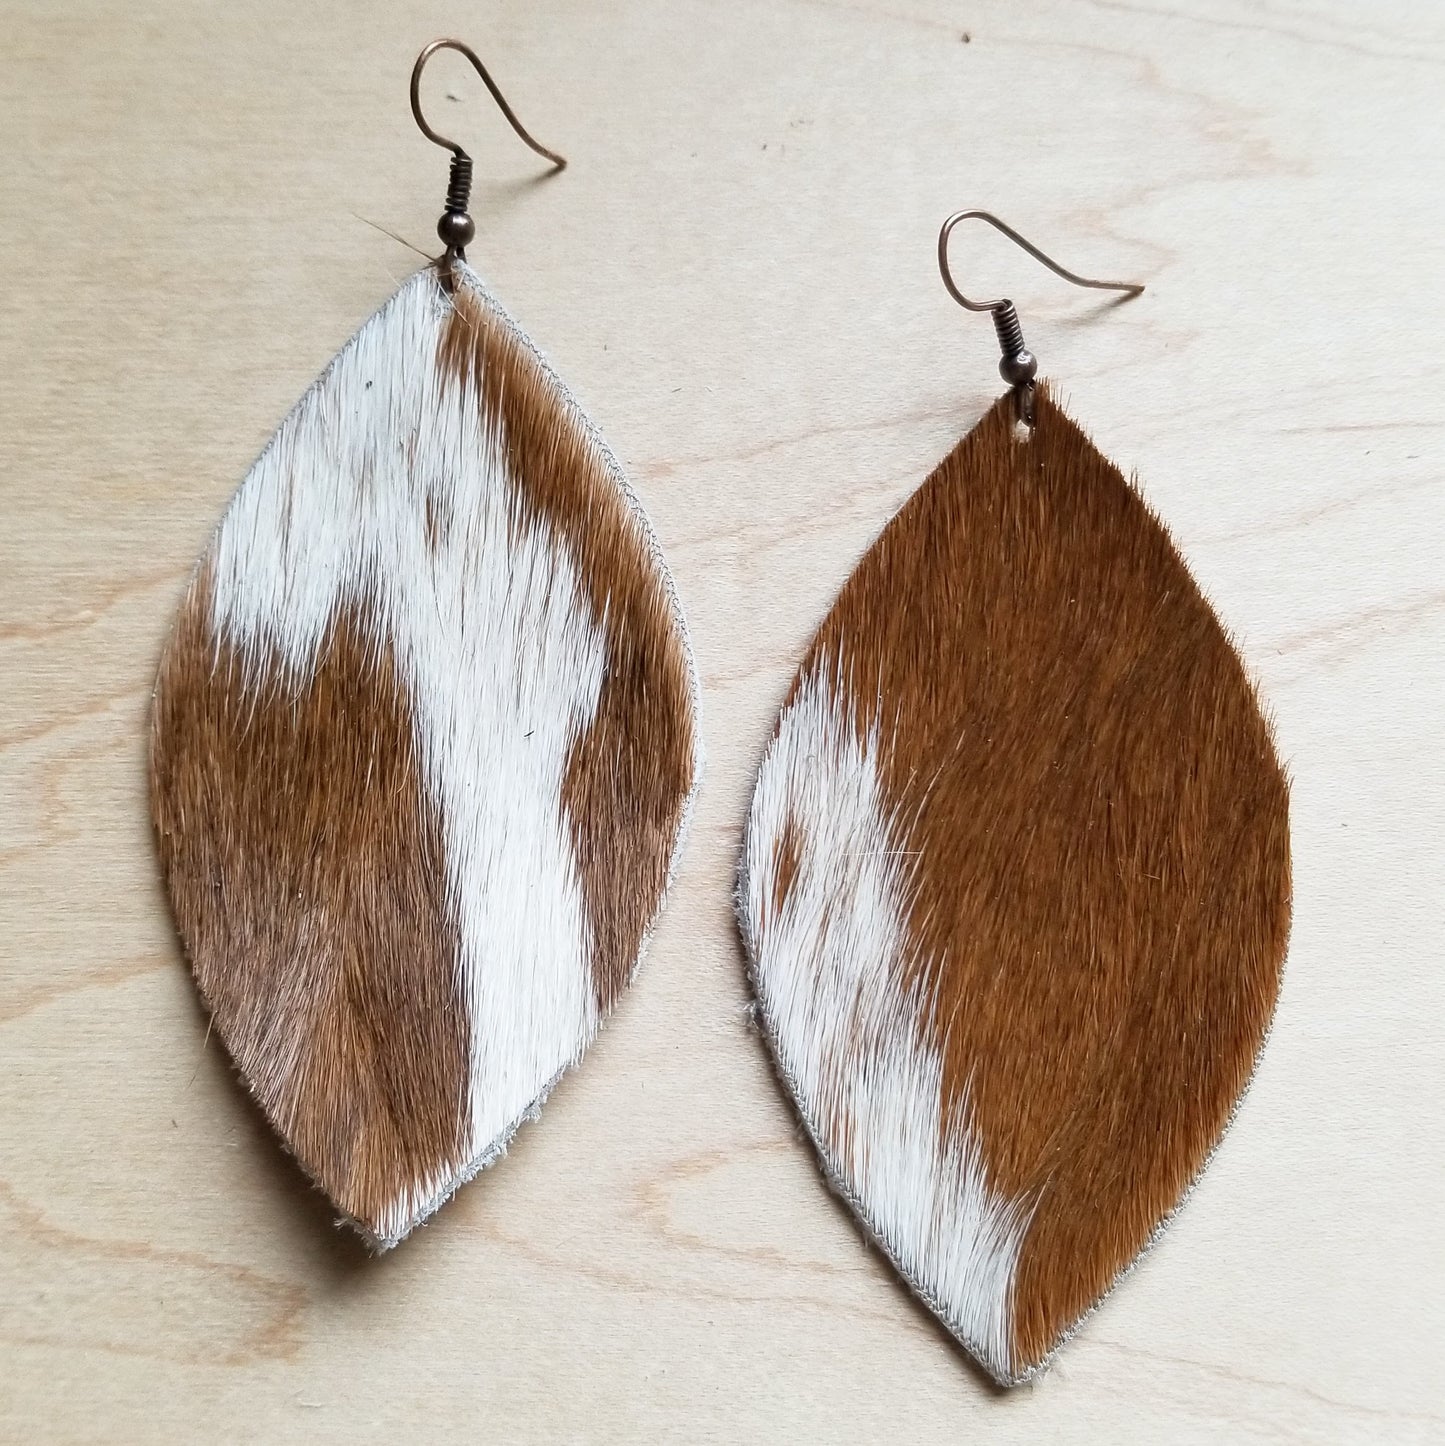 Leather Oval Earrings in Tan and White Hair-on-Hide 222c - The Jewelry Junkie